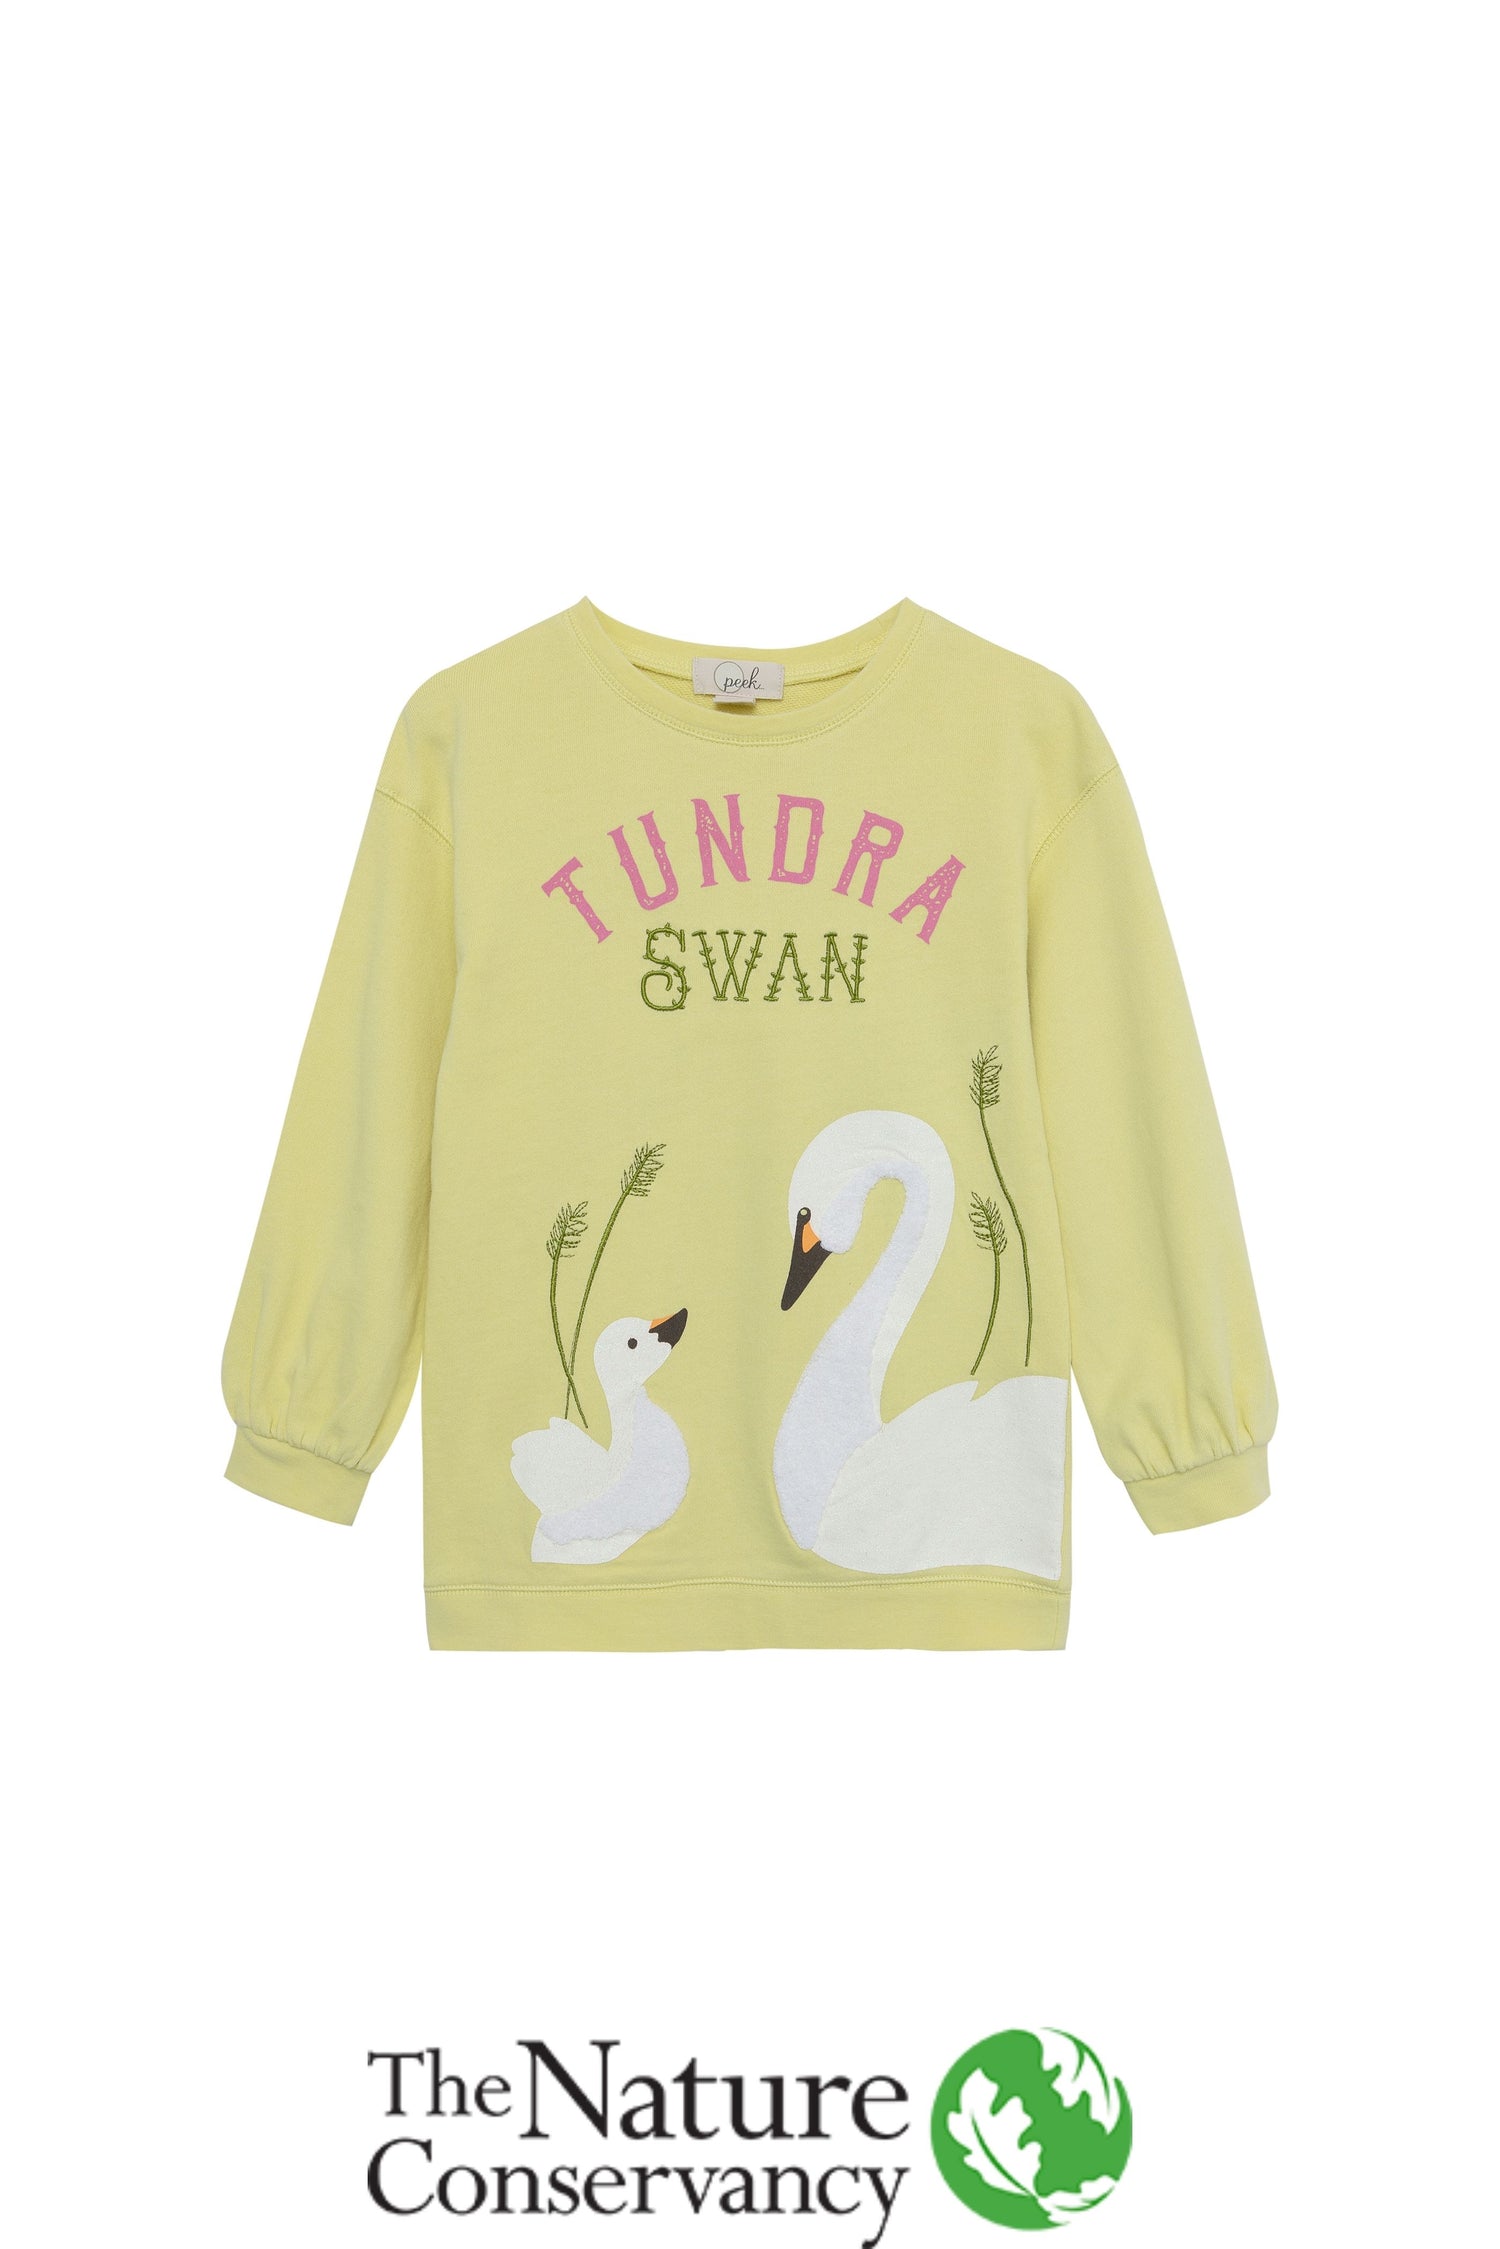 Front view of green sweatshirt with swans and "Tundra Swan" written